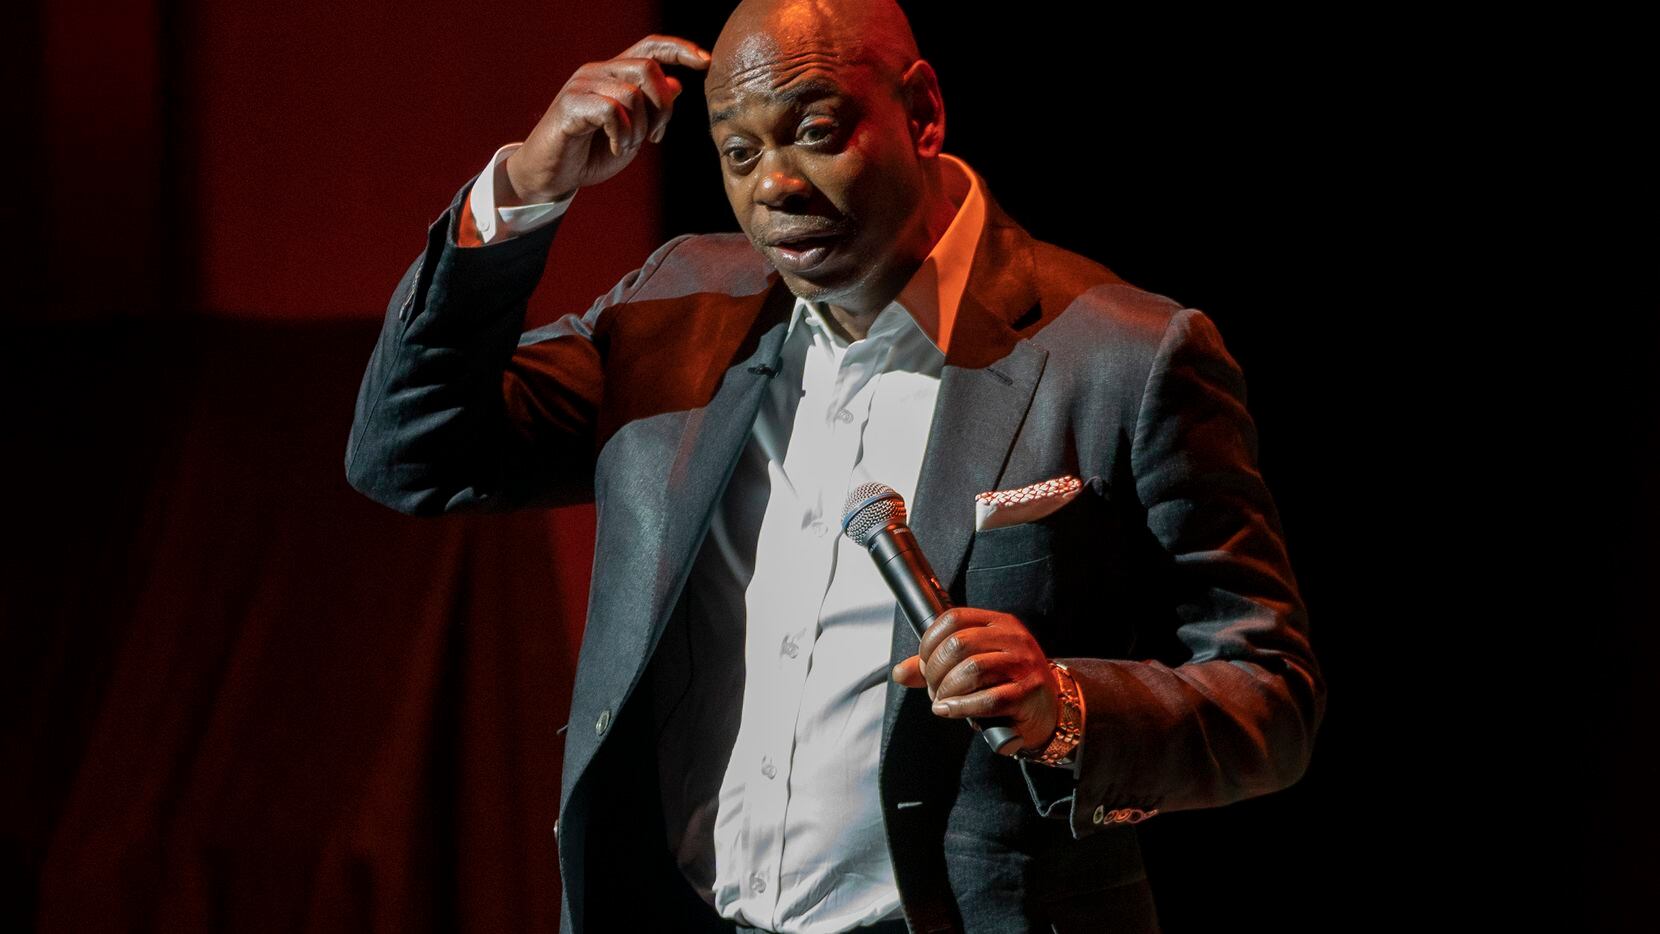 Dave Chappelle’s stand-up comedy show is coming to the American Airlines Center in Dallas on...